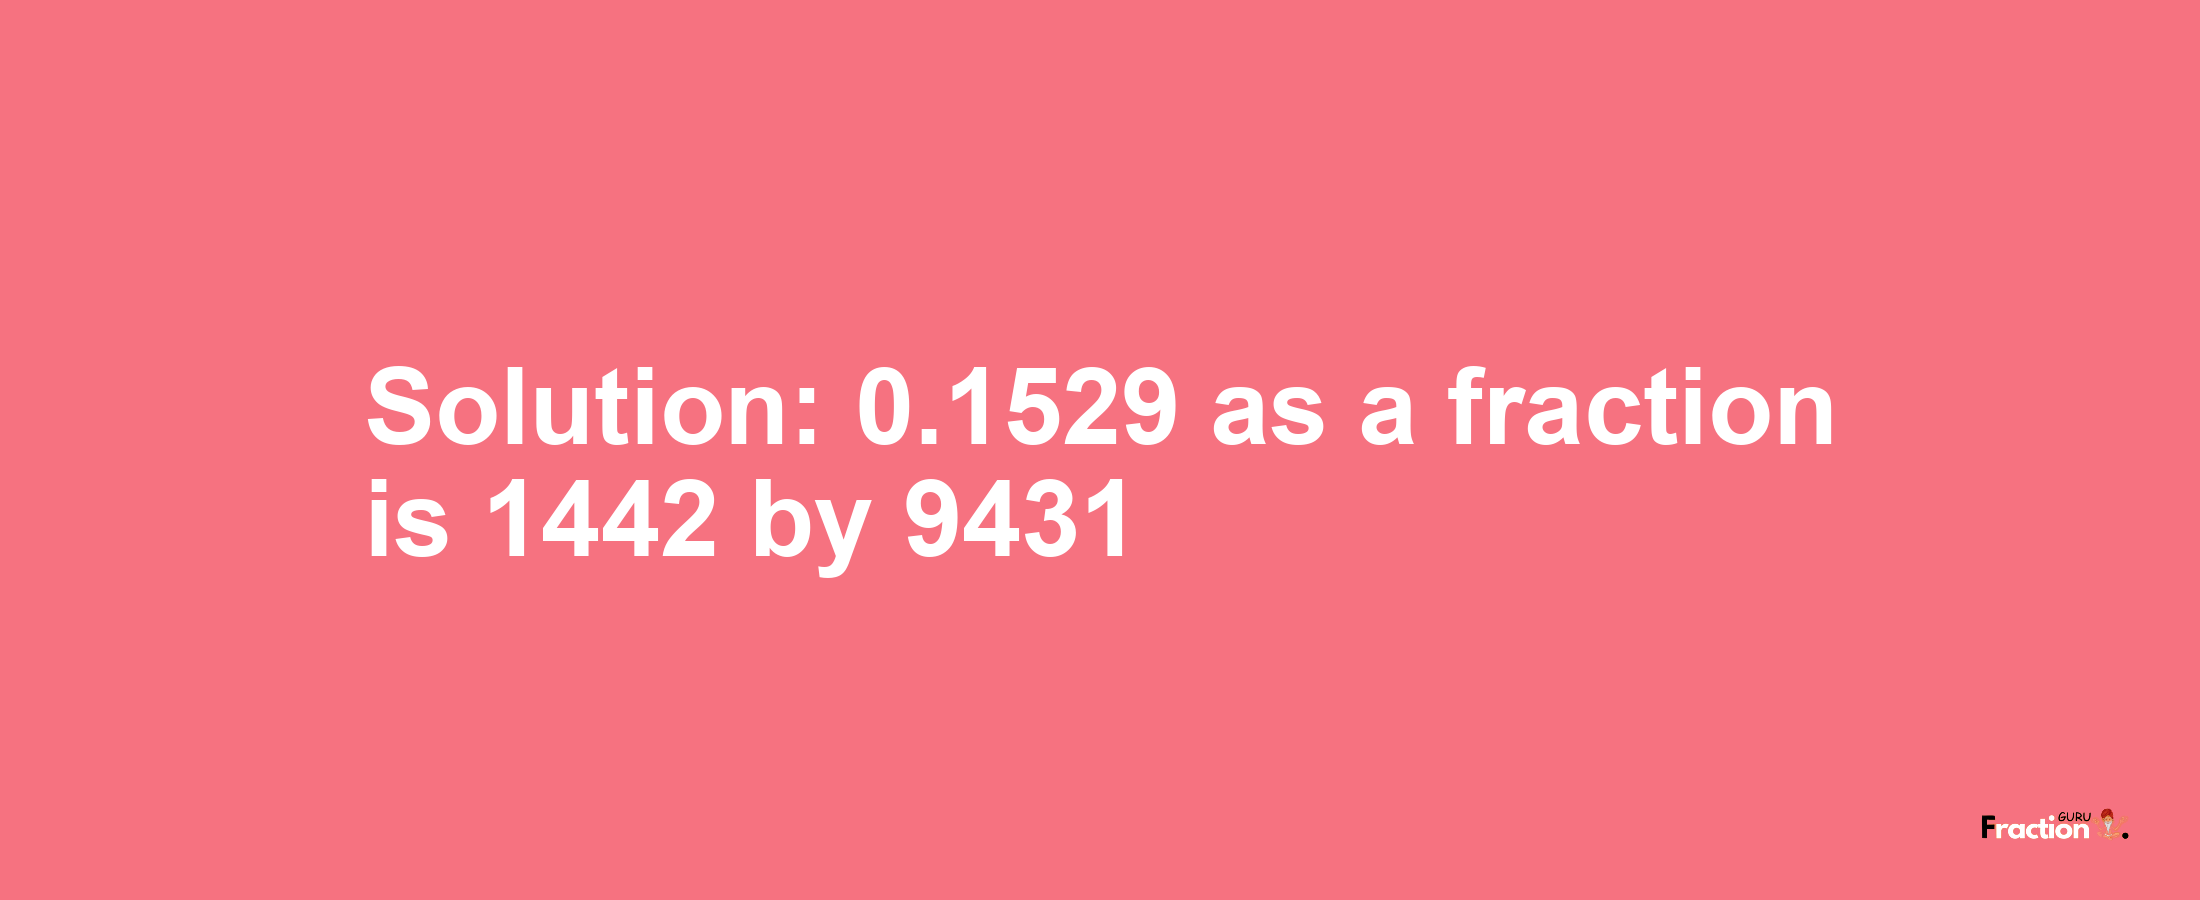 Solution:0.1529 as a fraction is 1442/9431